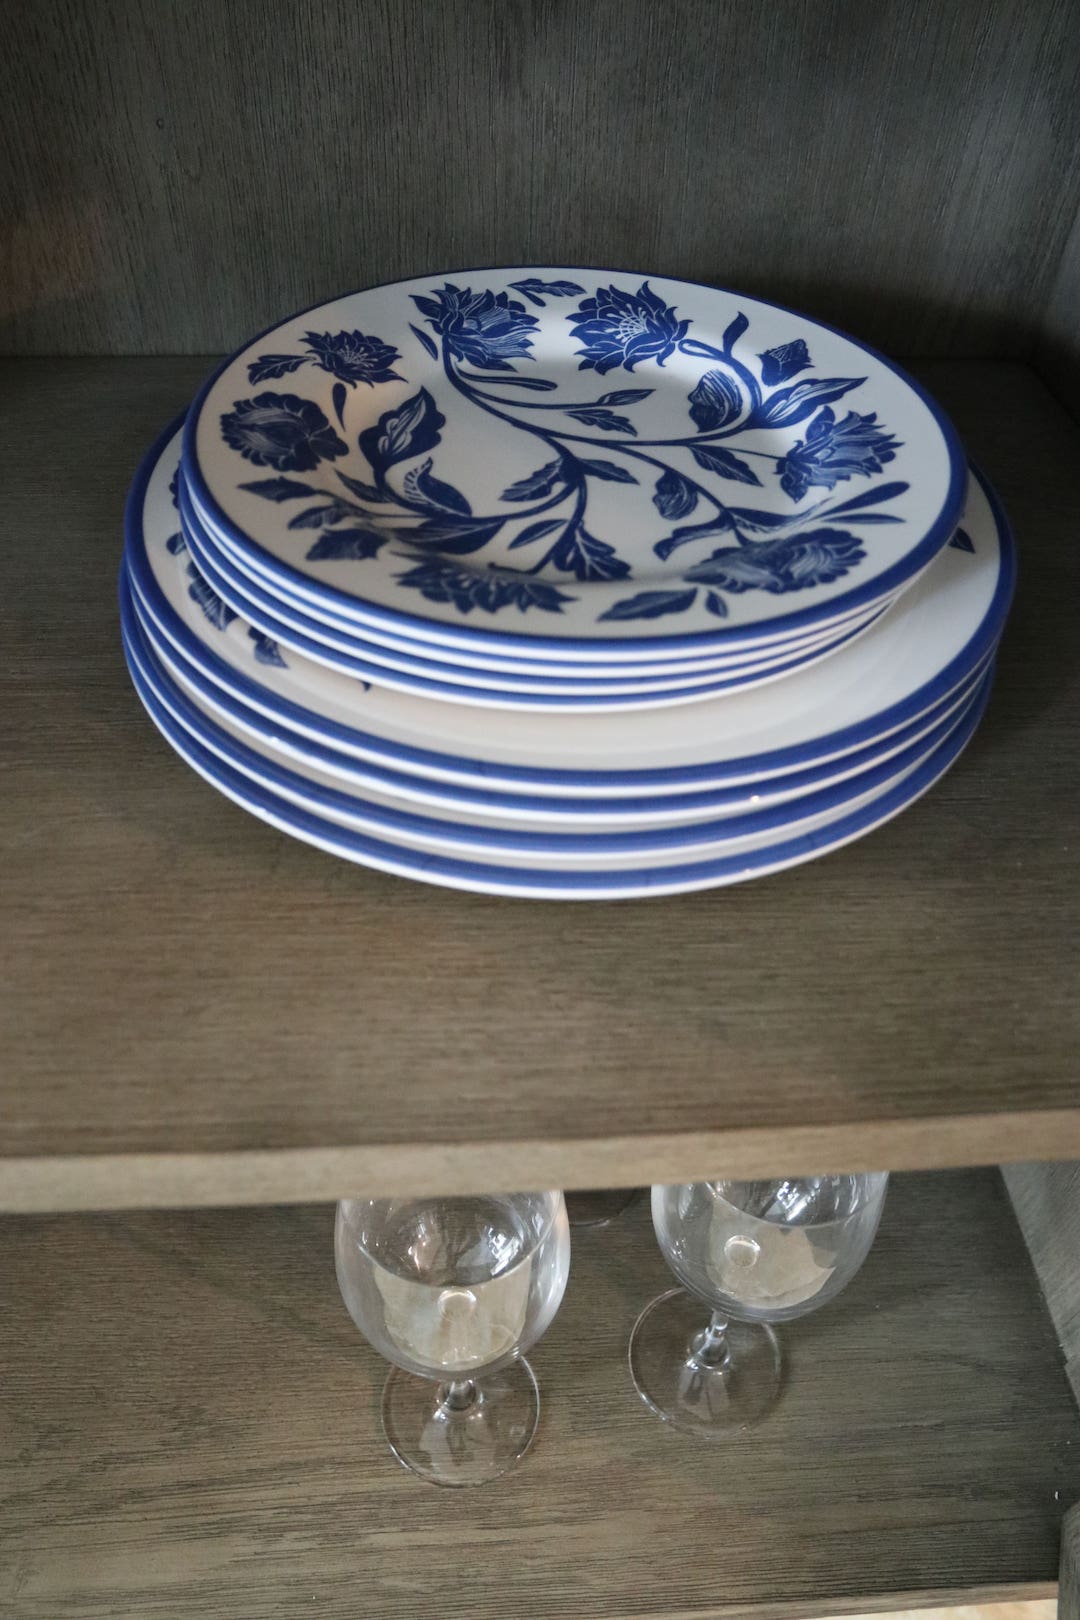 printed dining set for qvc july favorites